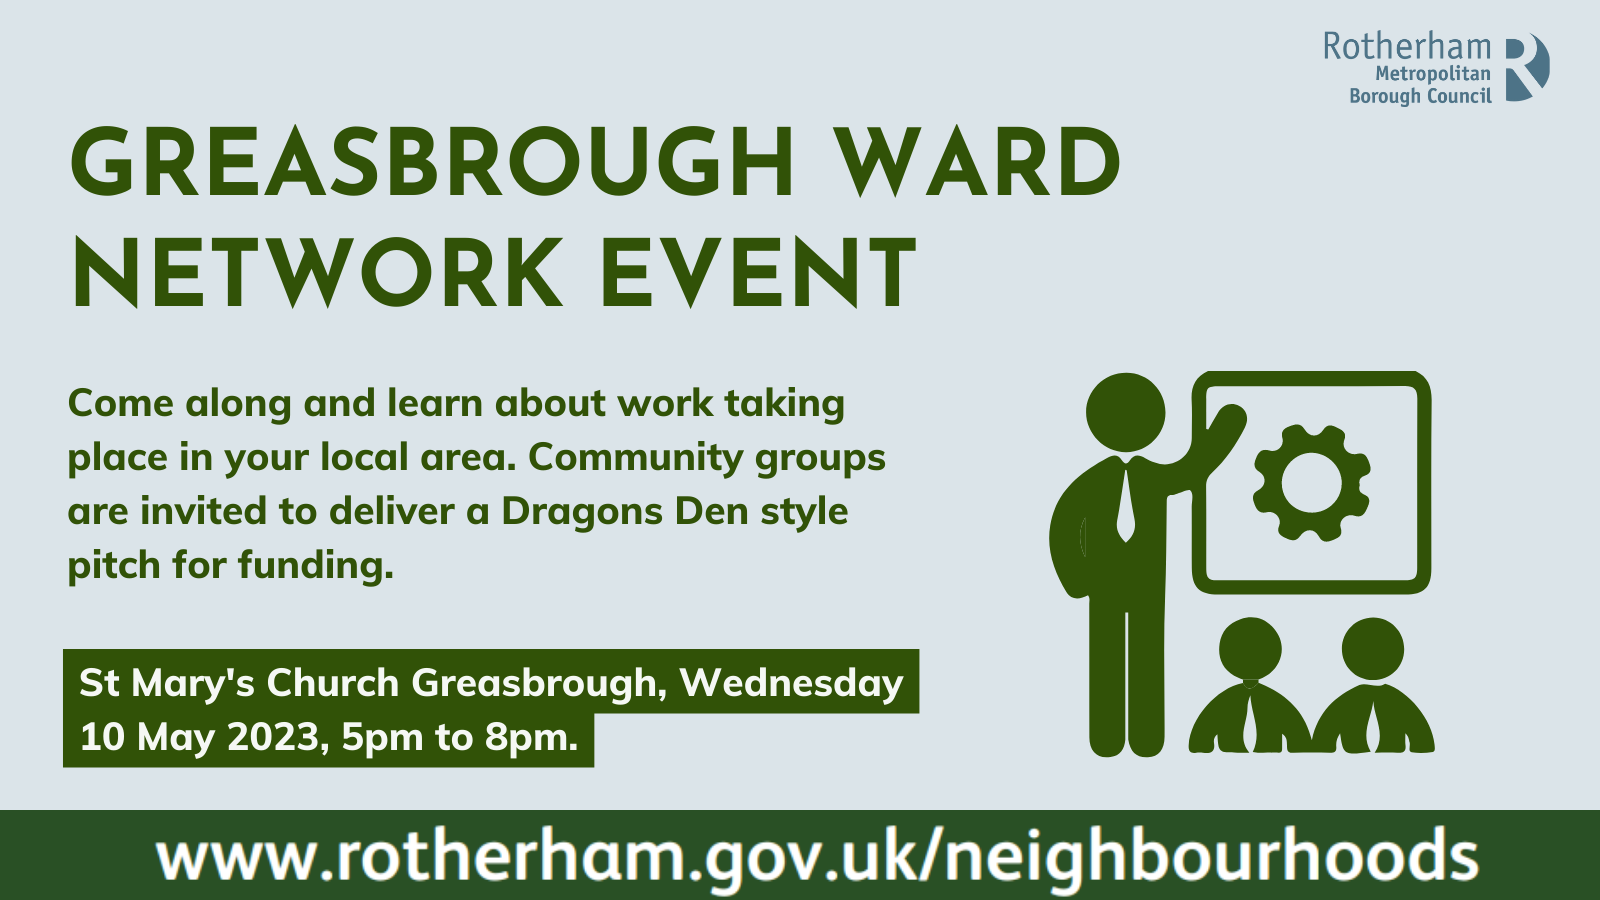 Greasbrough network event